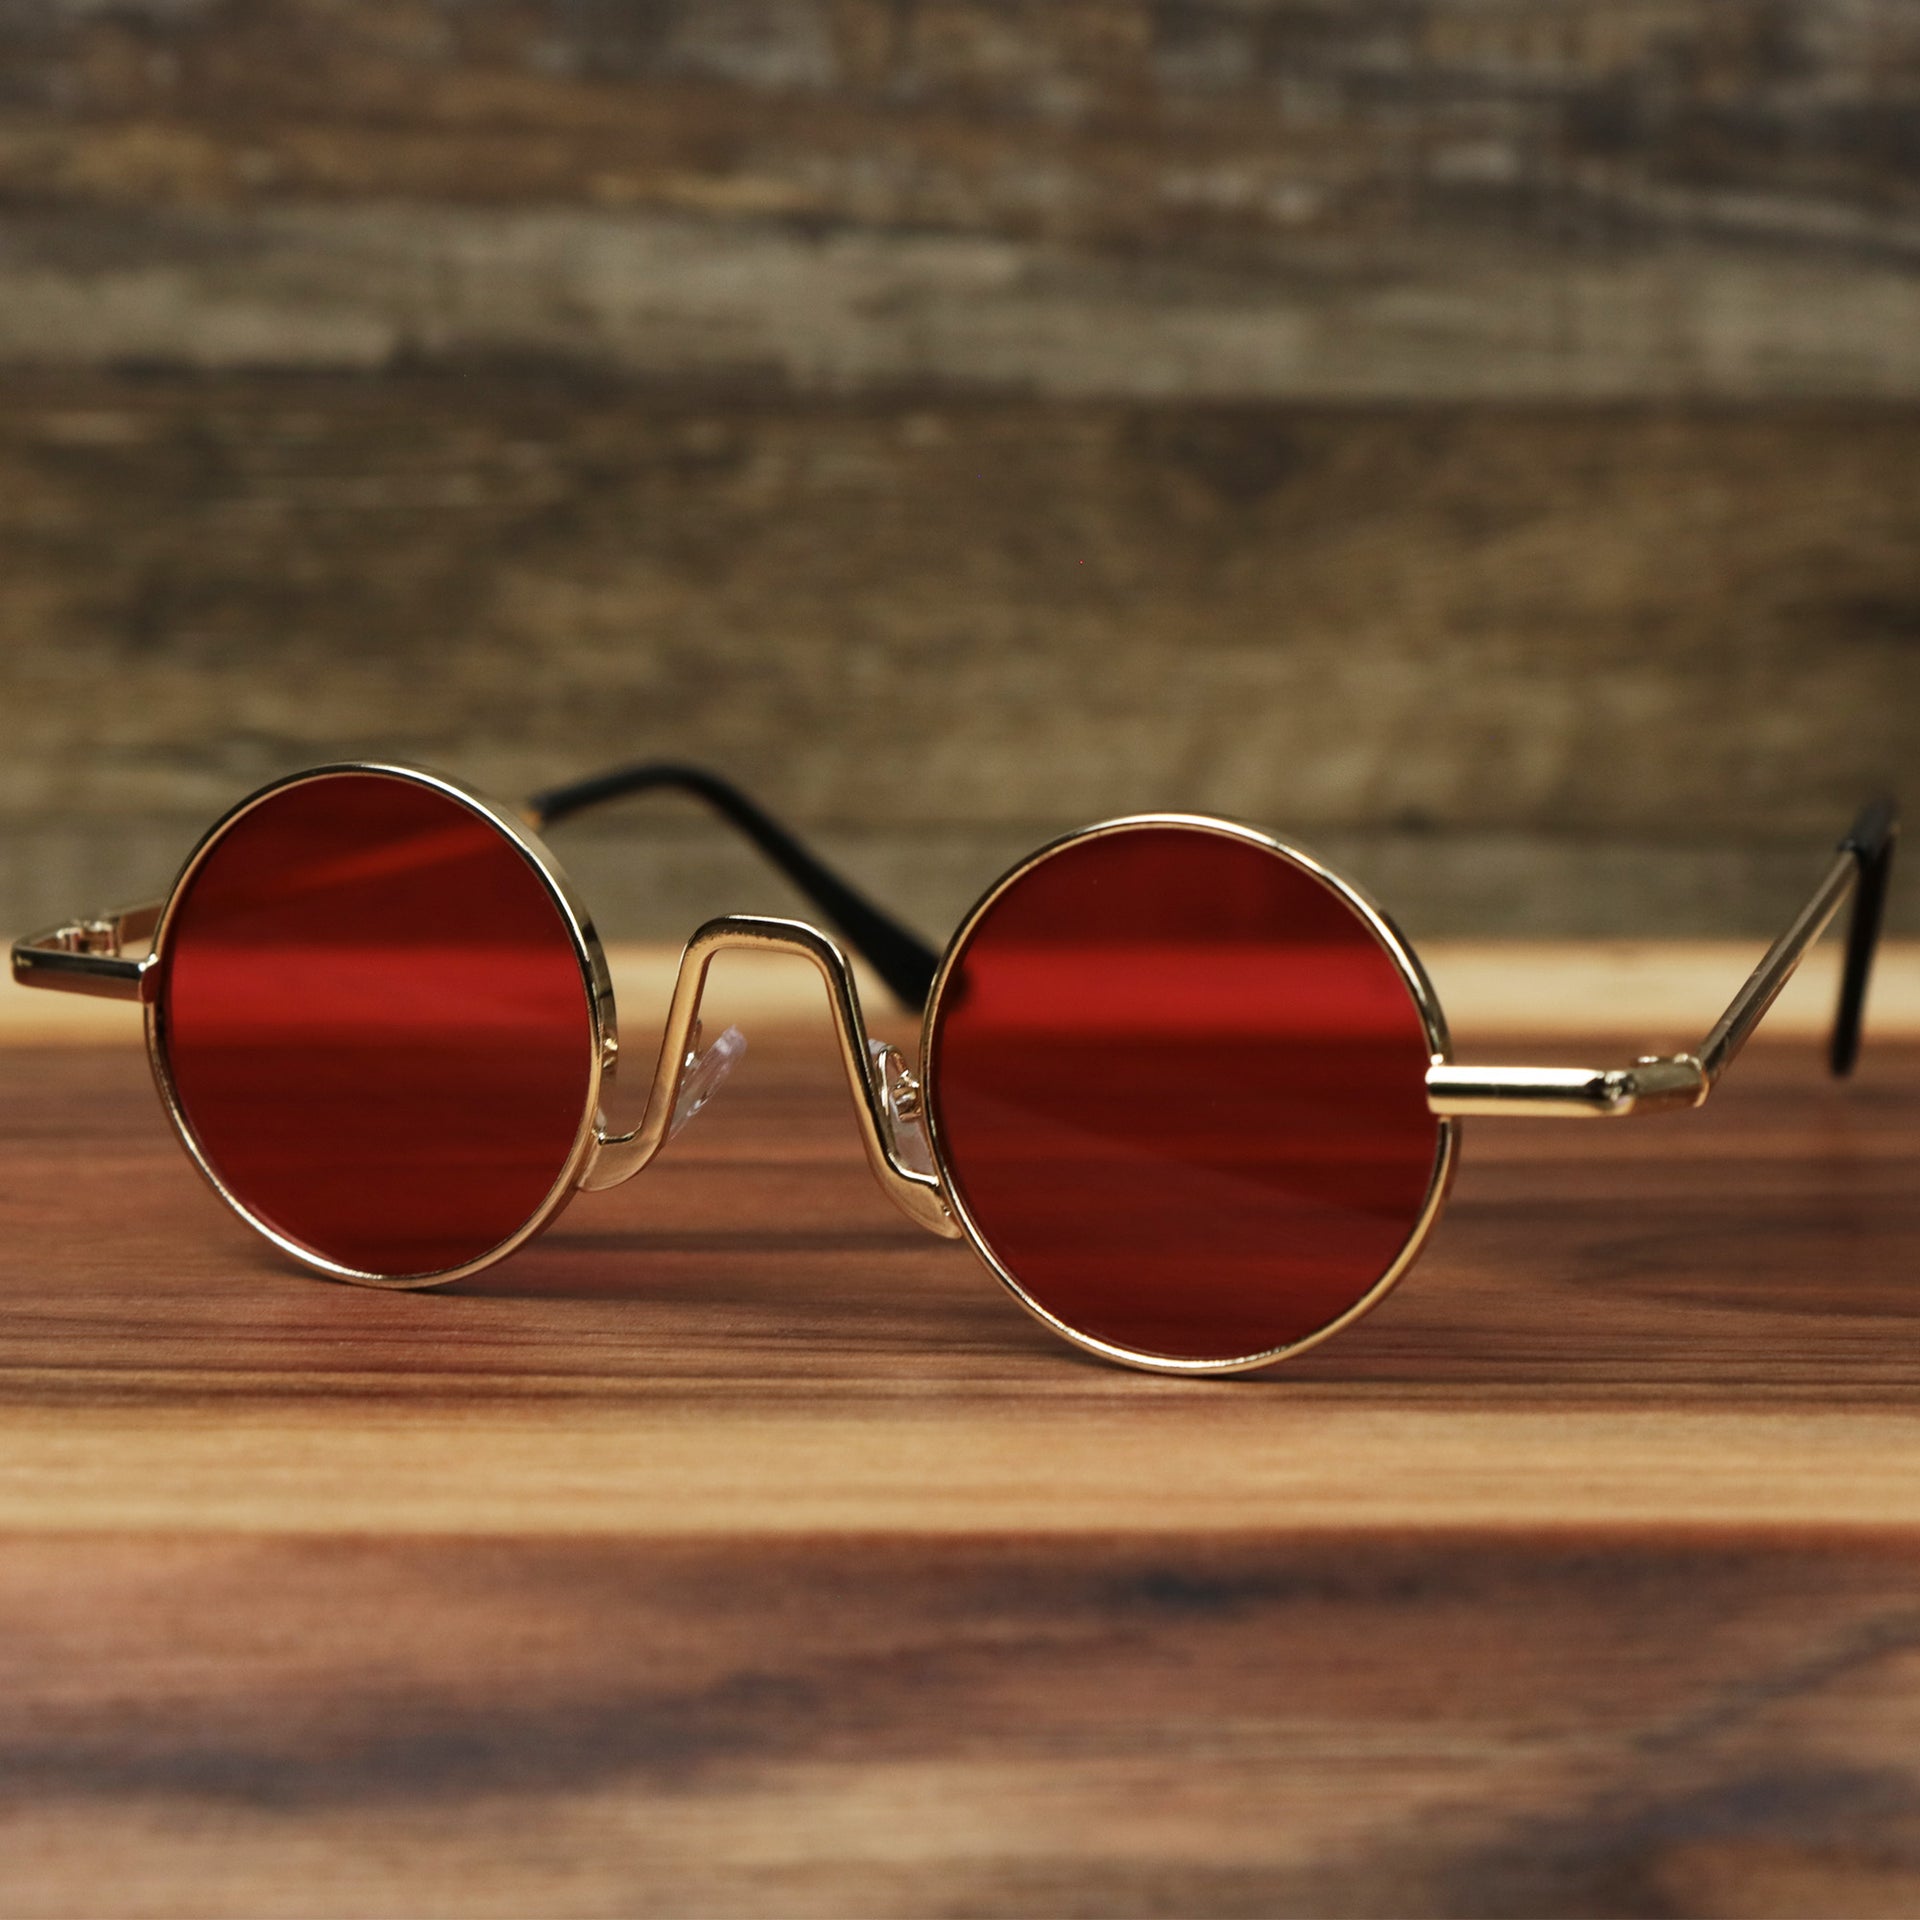 The Round Frames Red Lens Sunglasses with Gold Frame